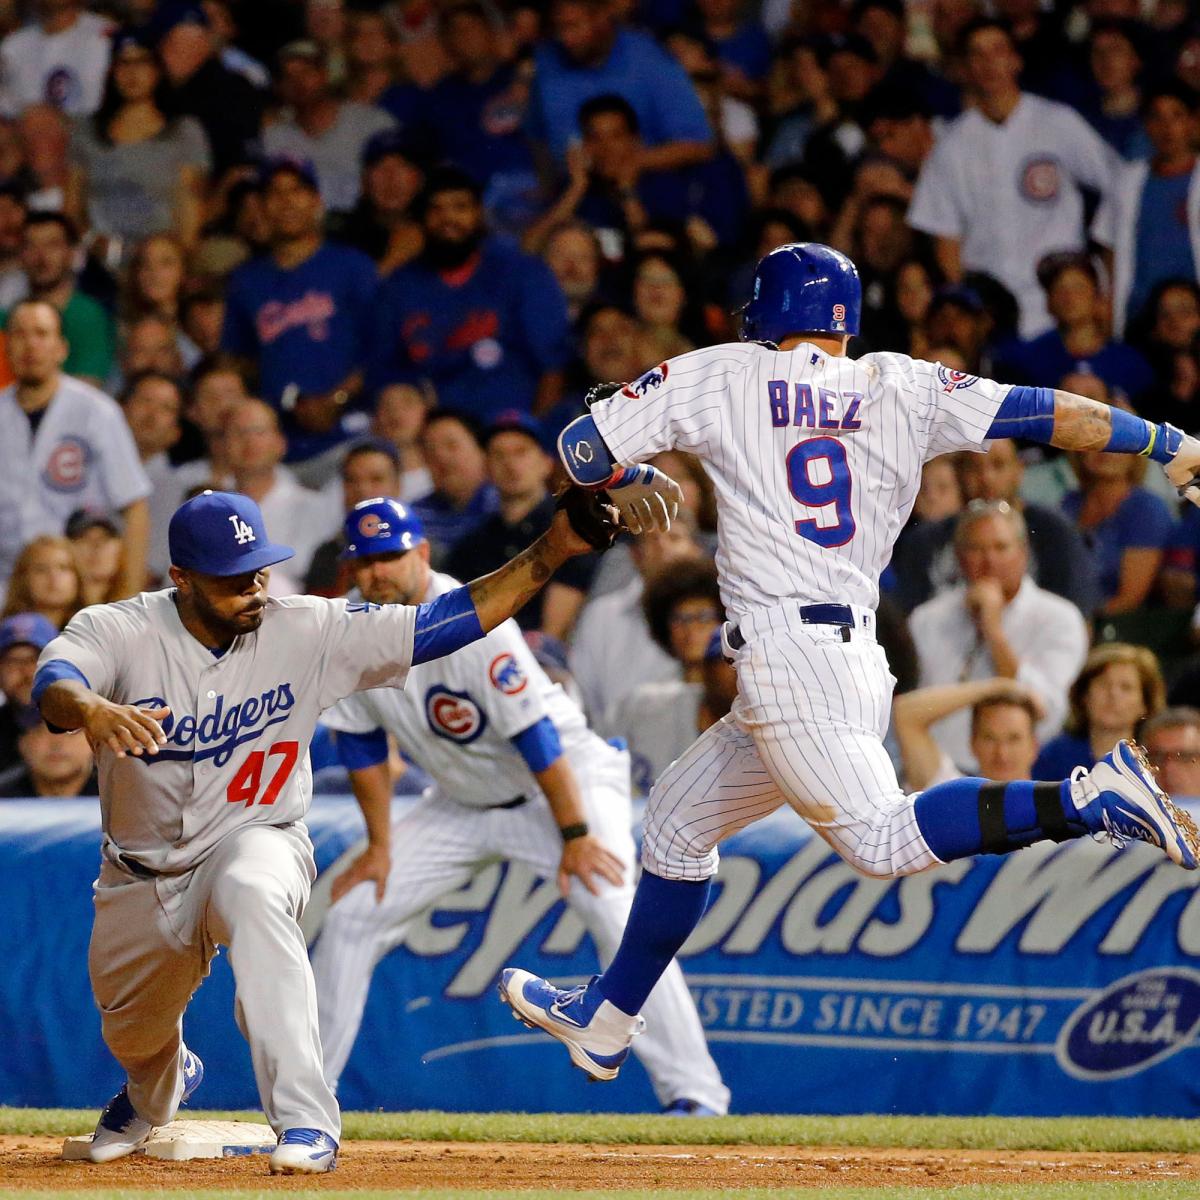 Dodgers vs. Cubs NLCS Game 1 Live Stream Schedule, Ticket Info and